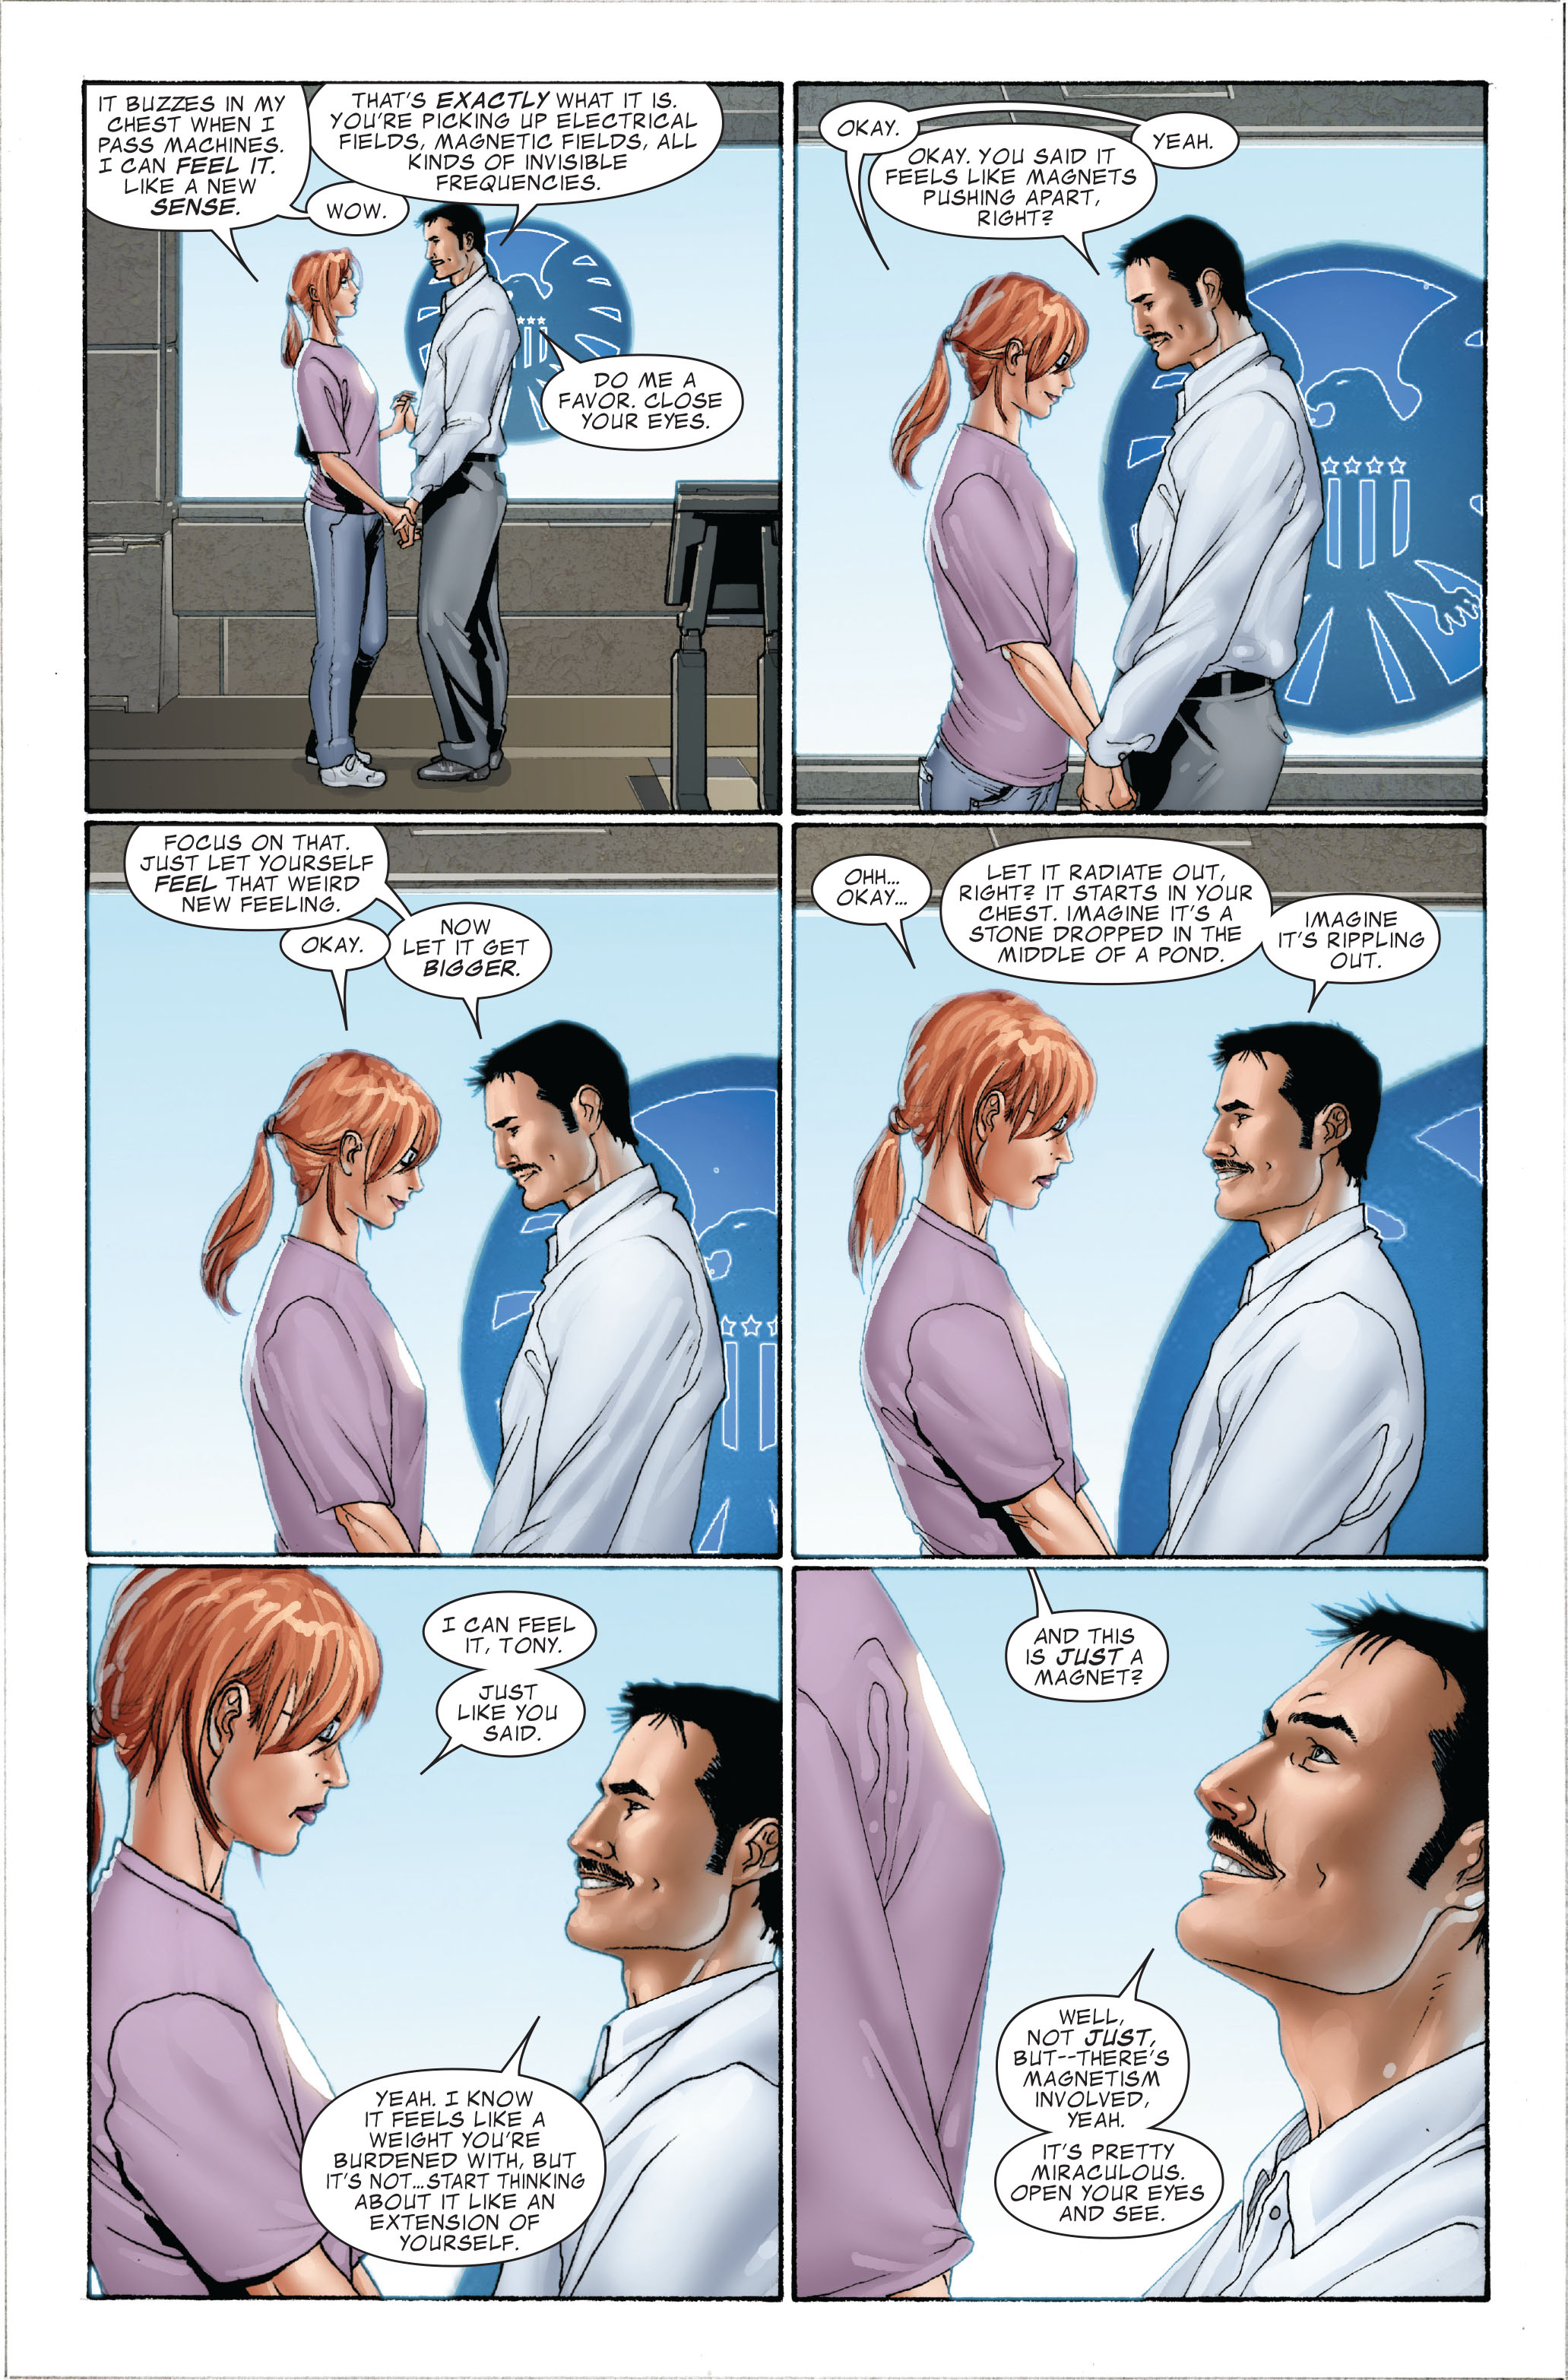 Invincible Iron Man (2008) 4 Page 22